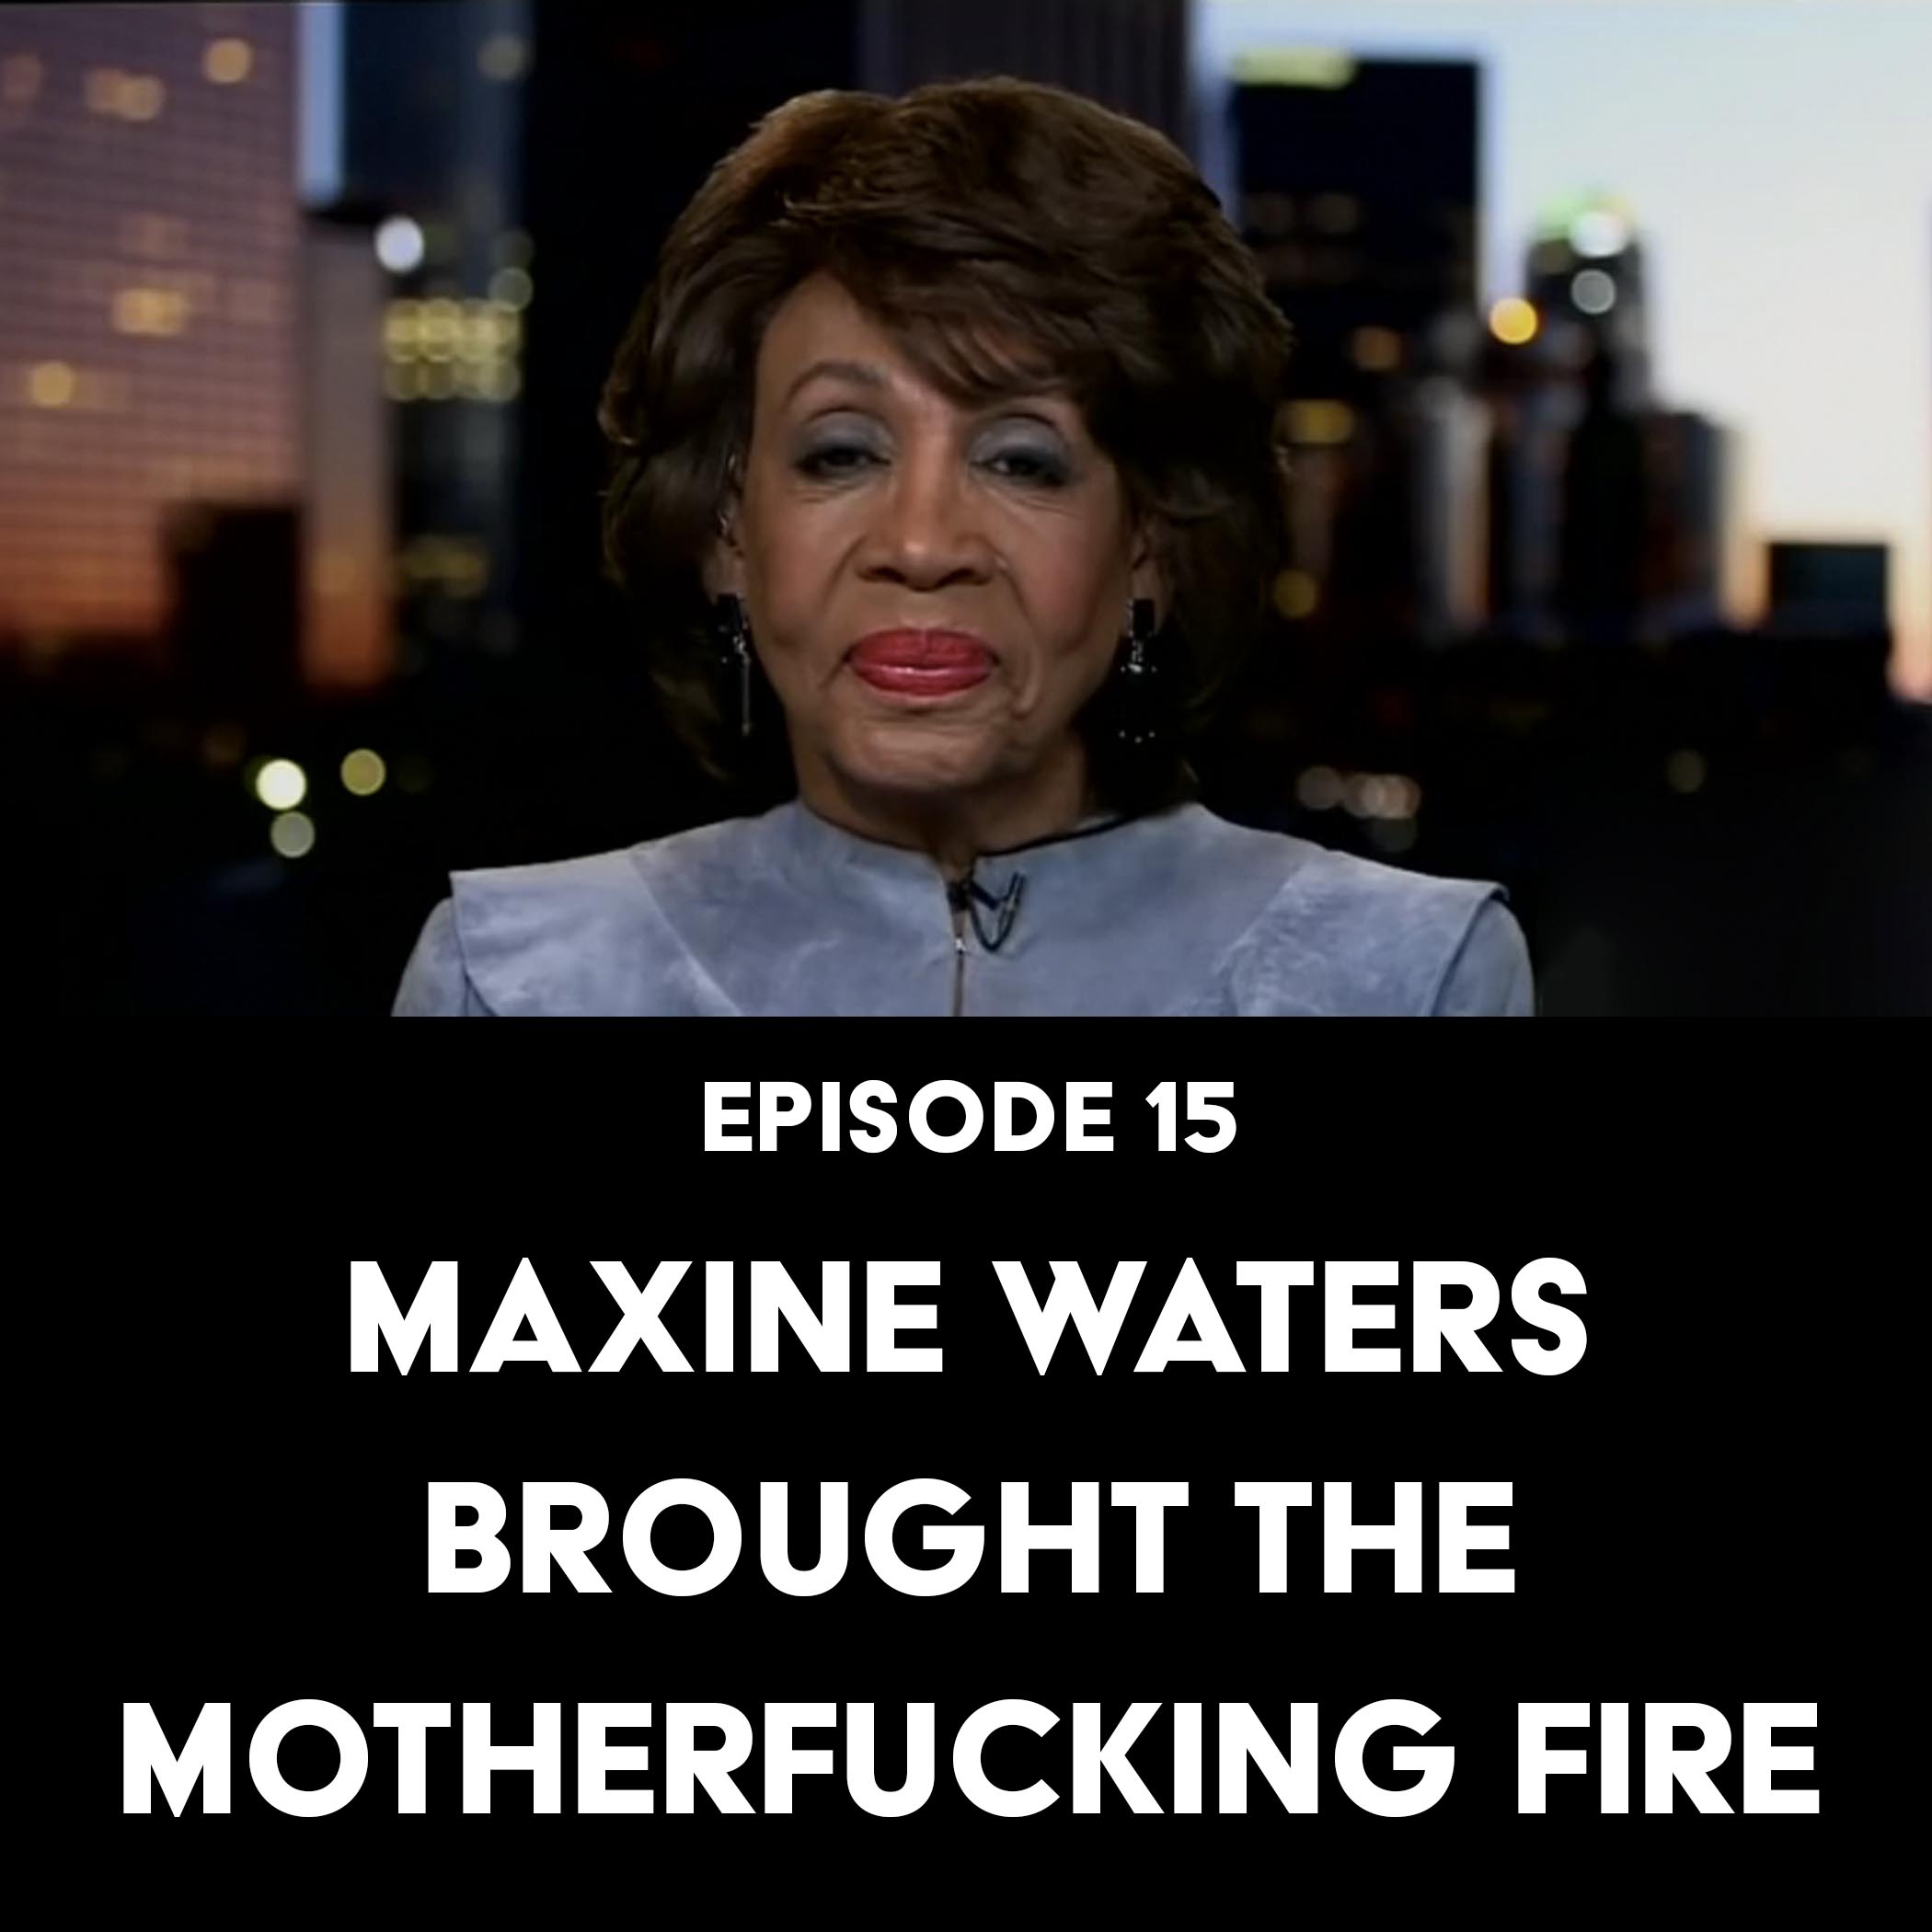 Episode 15: Maxine Waters Brought the Motherfucking Fire